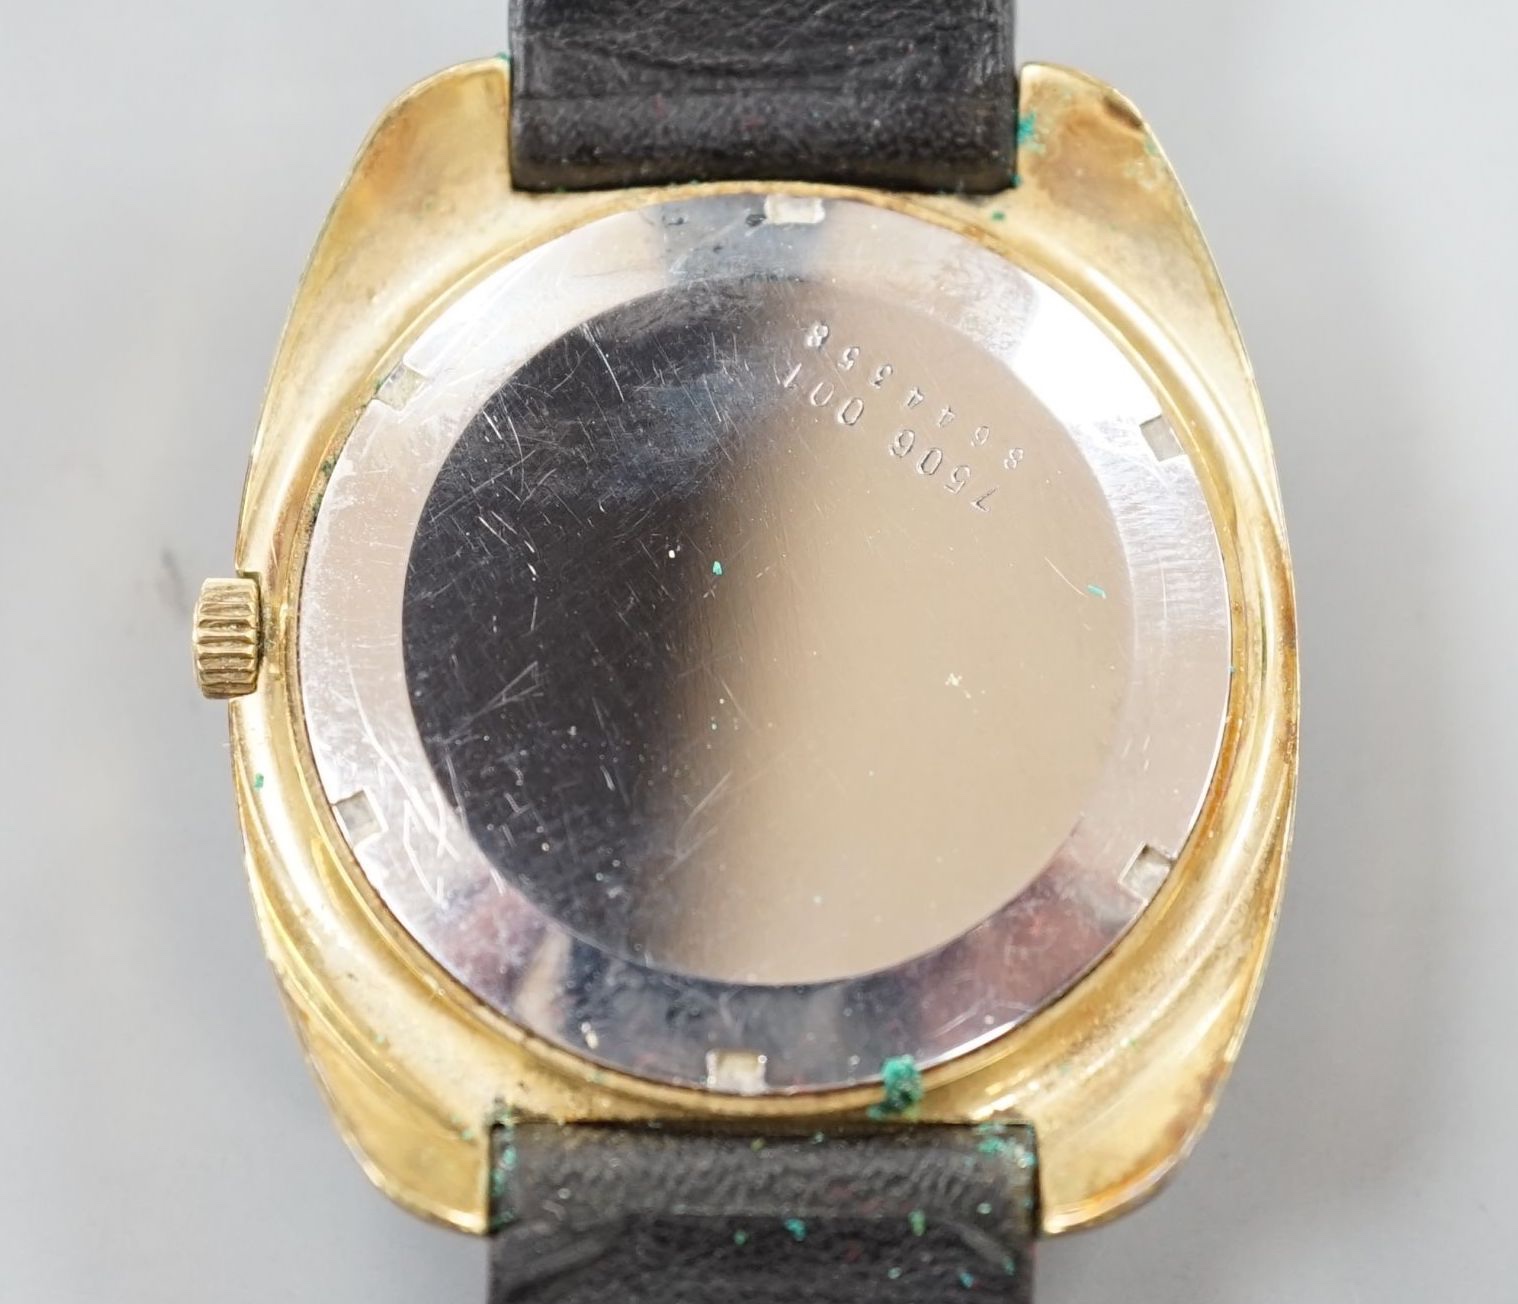 A gentleman's 1970's gilt and steel Certina Biostar Electronic wrist watch, on associated black leather strap, case diameter 39mm, with Certina box.